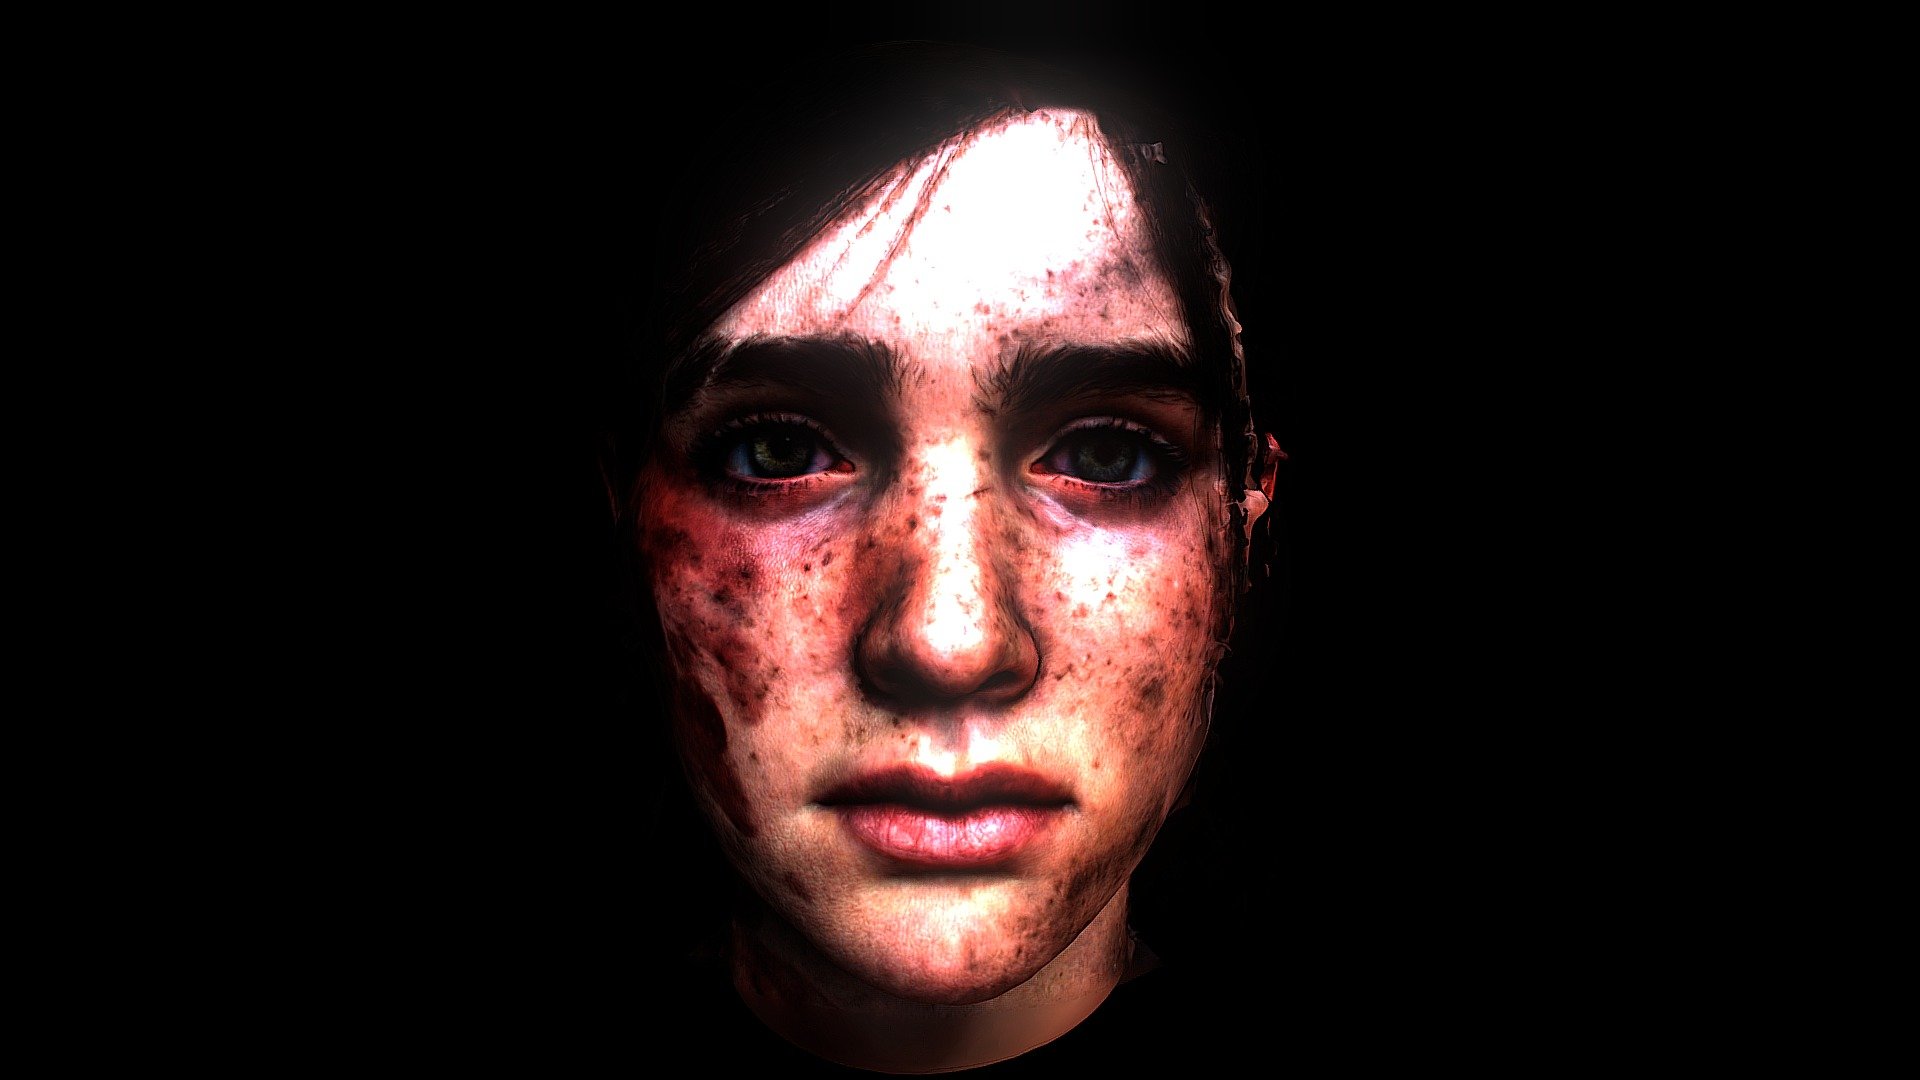 Photos The Last of Us The Last of Us 2 2 Girls 3D Graphics 1920x1080